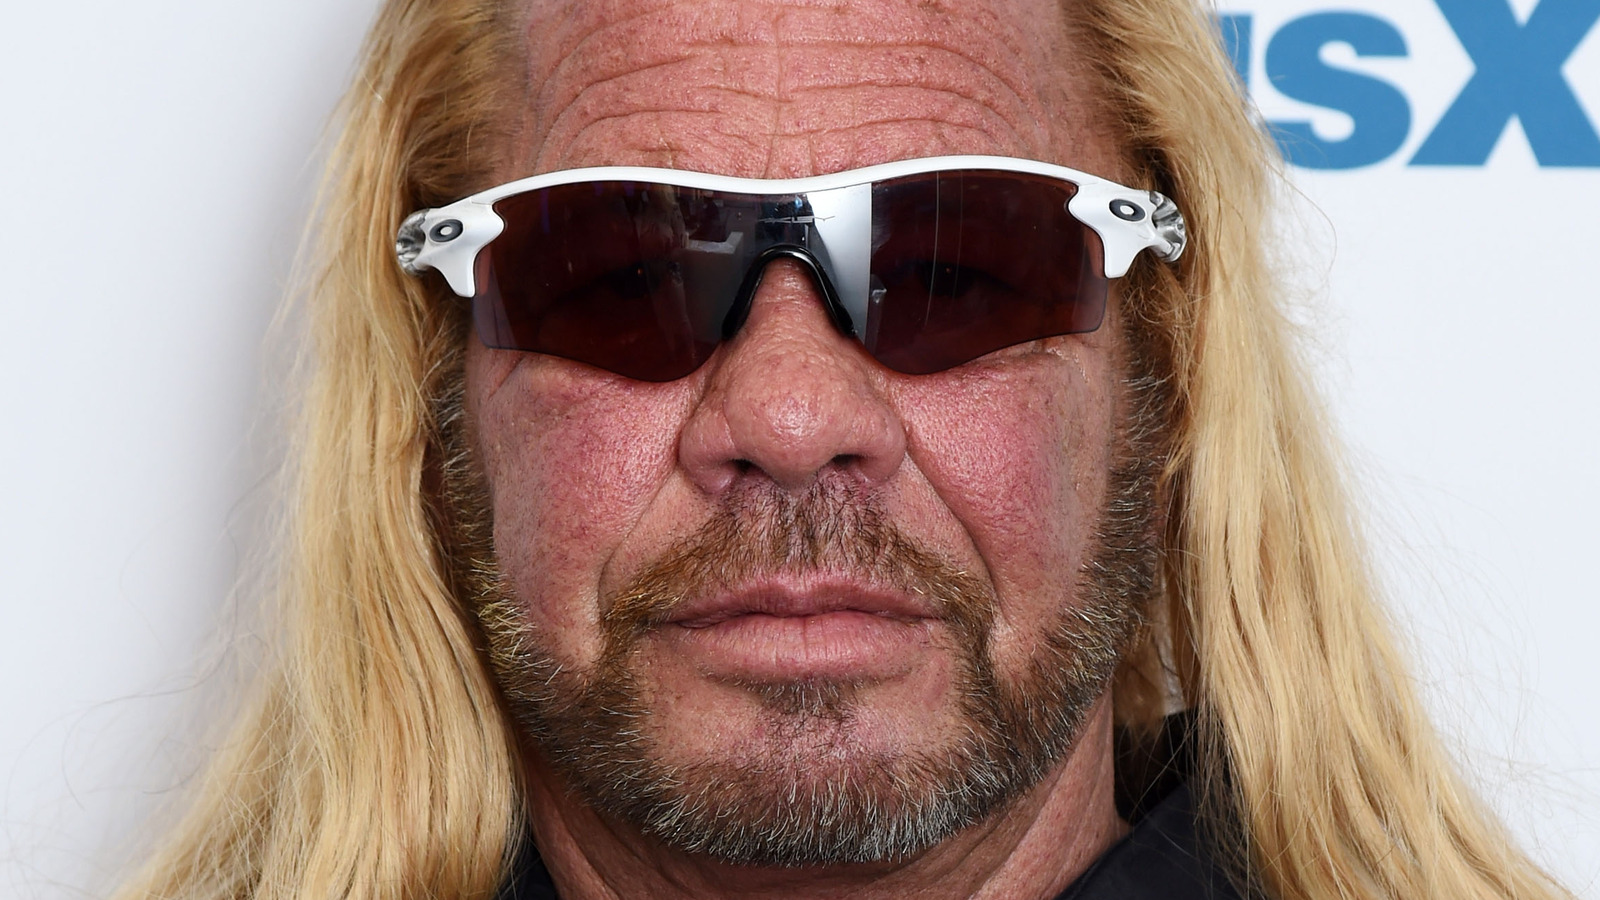 The Real Reason Duane Chapman Decided To Become A Bounty Hunter